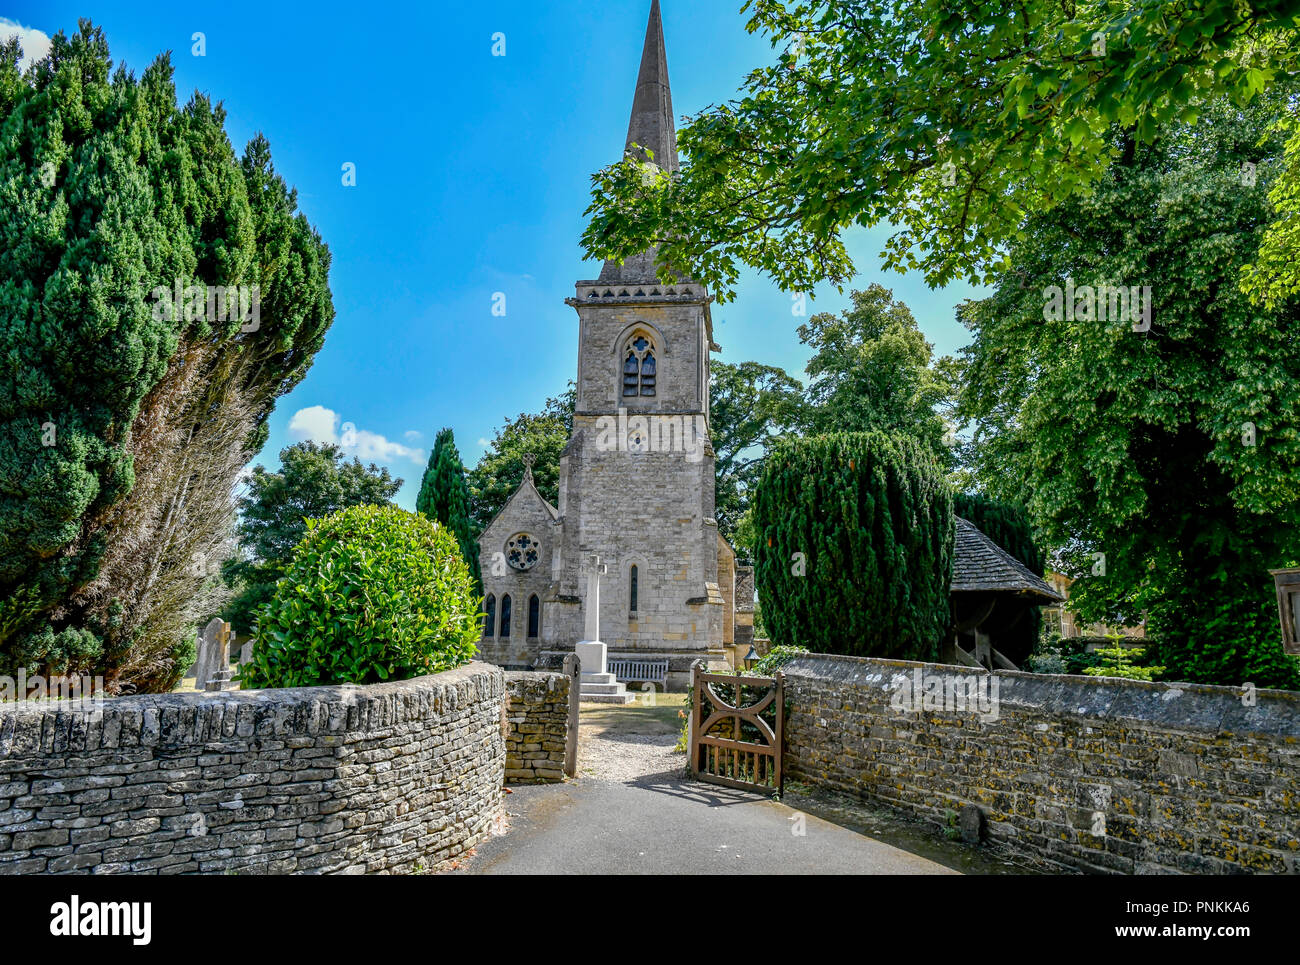 The Parish Church of Saint Mary Lower Slaughter is located in Lower Slaughter, Gloucestershire. England UK. The 13th century Anglican parish church is Stock Photo